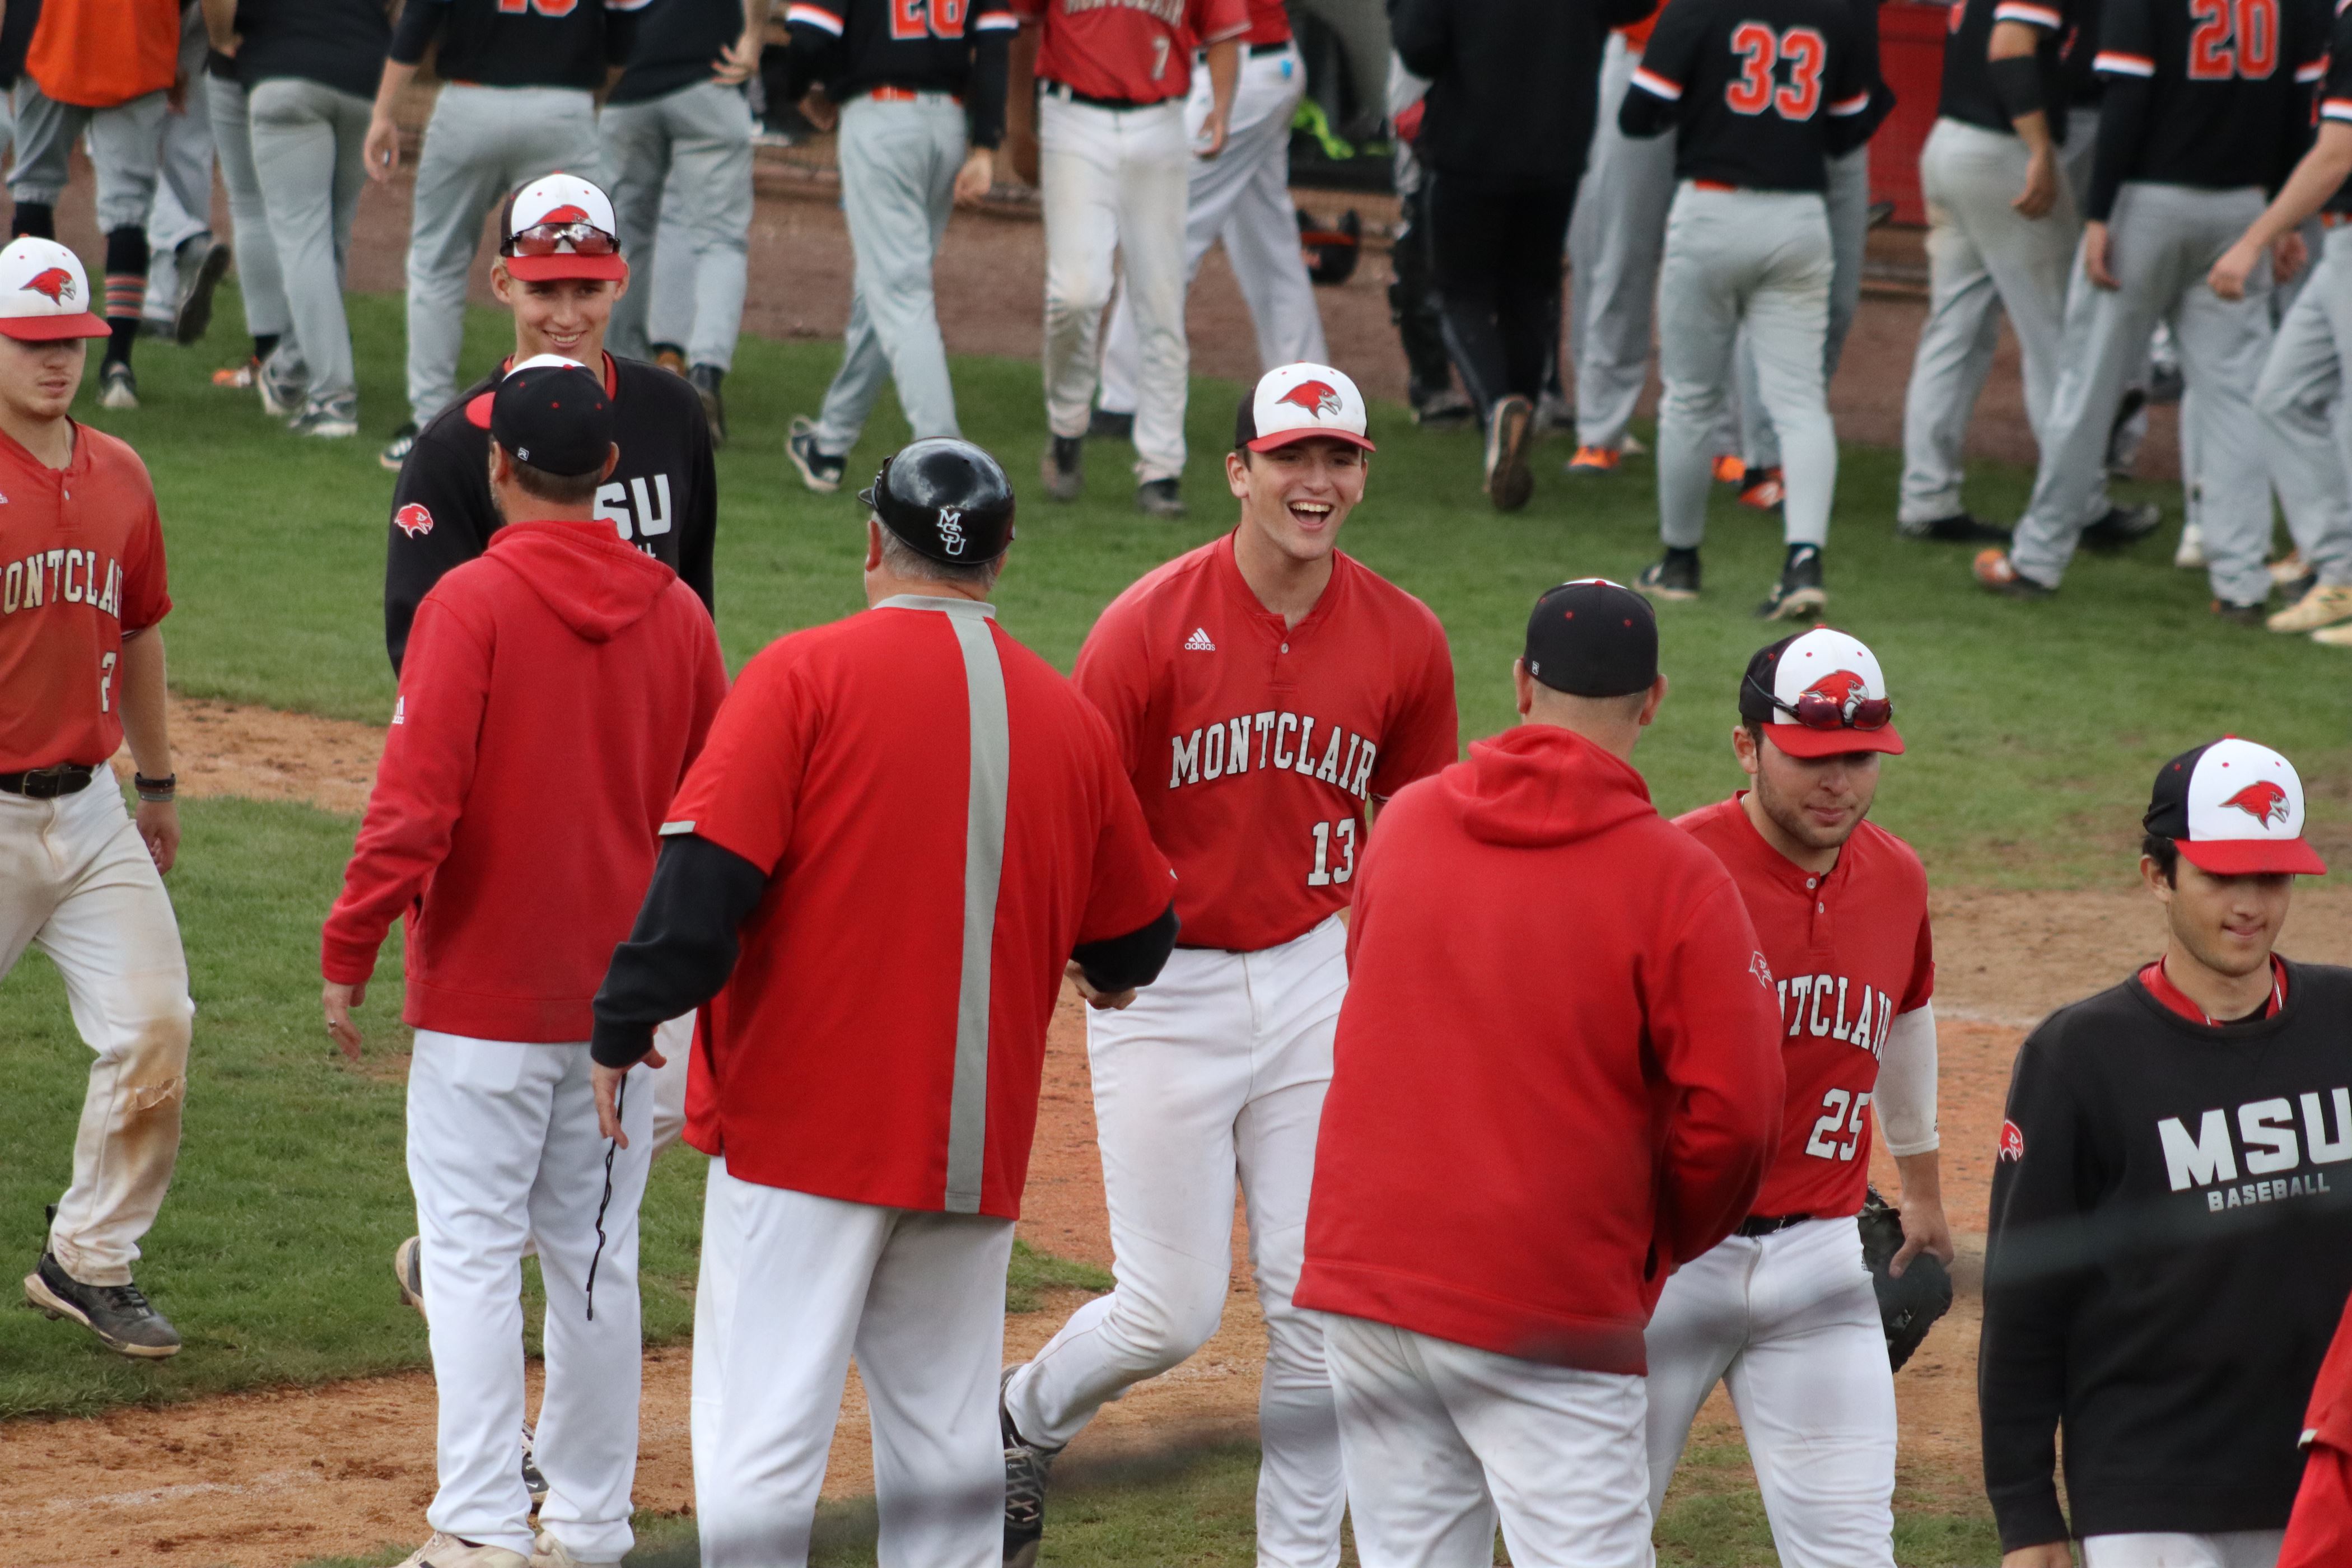 Montclair State players shake hands after a great win. Photo courtesy of Trevor Giesberg